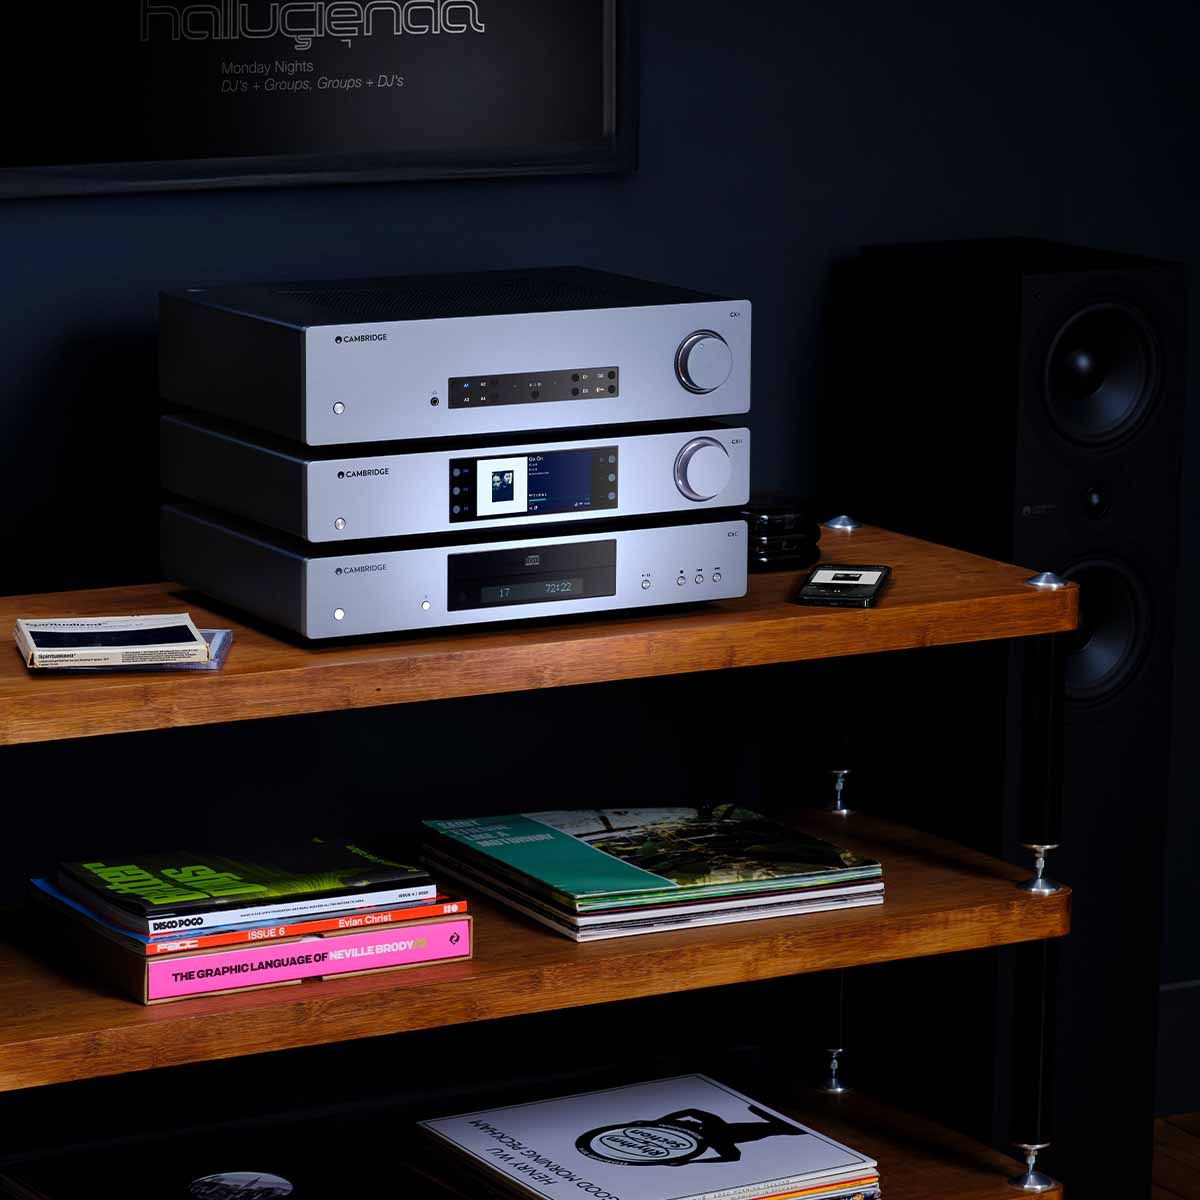 Cambridge CXN100 Network Player - Lunar Grey as part of audio stack on media console